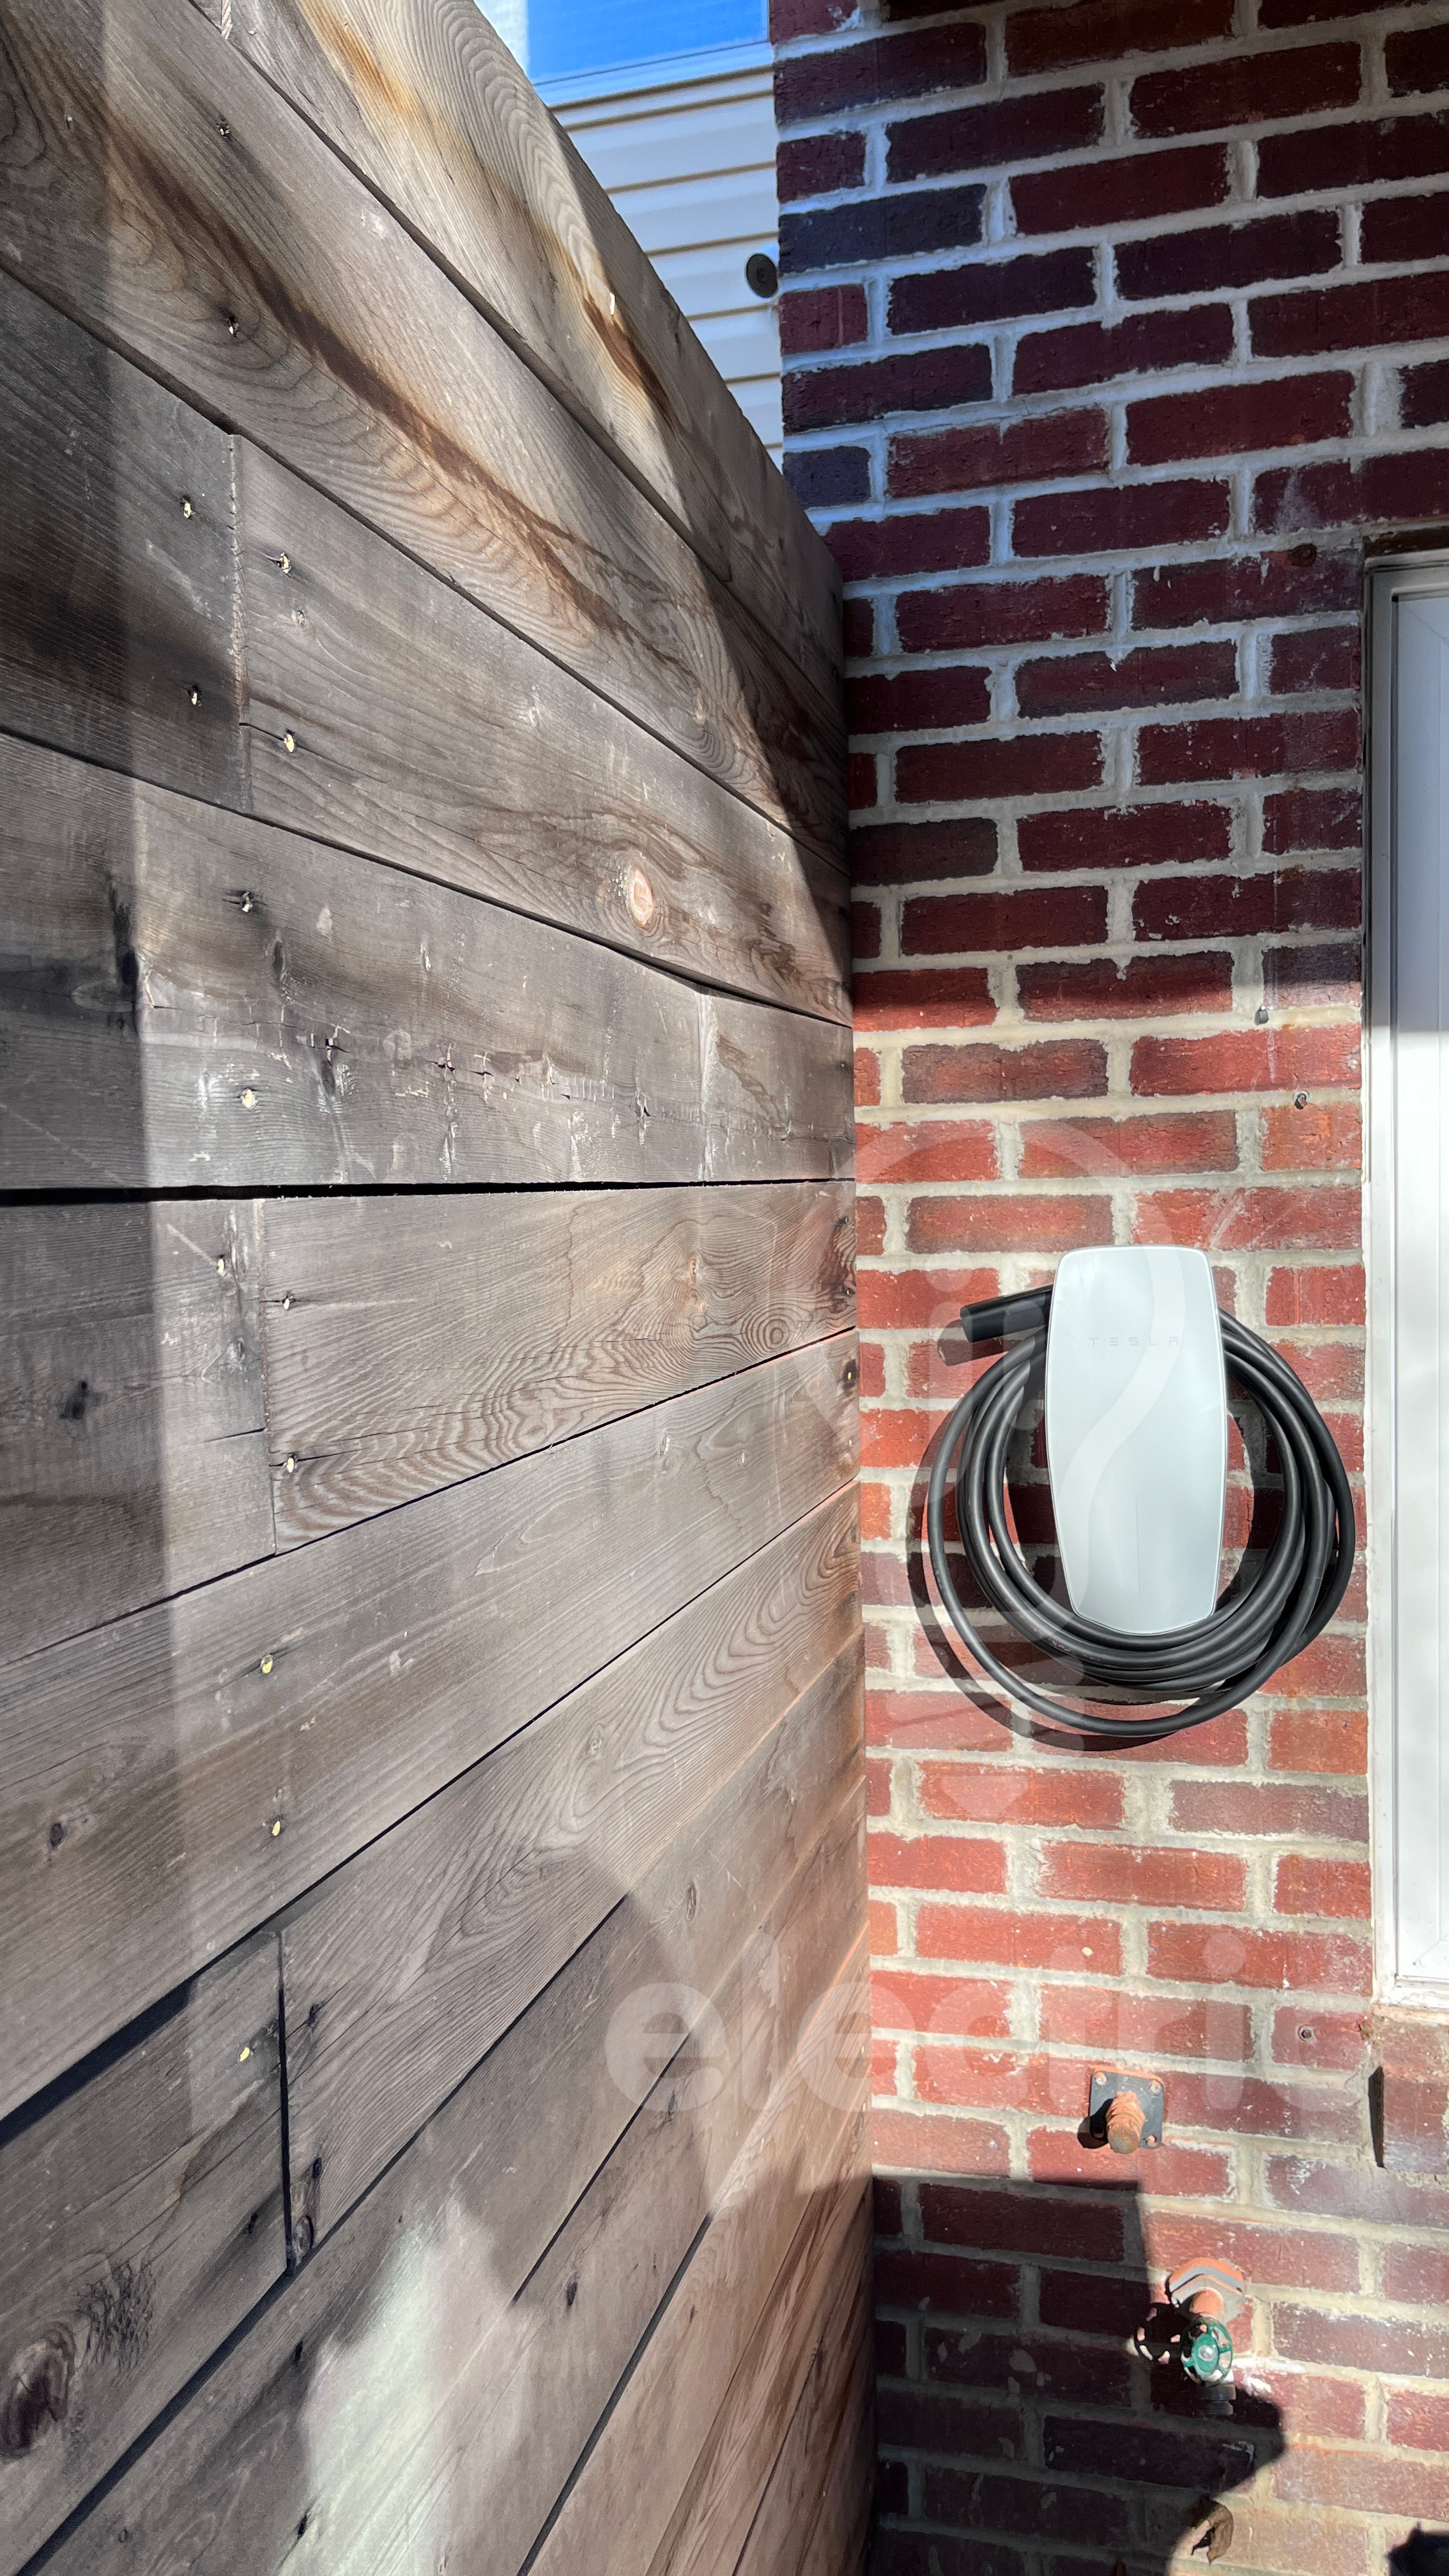 Tesla wall connector installed outside concealed finished.